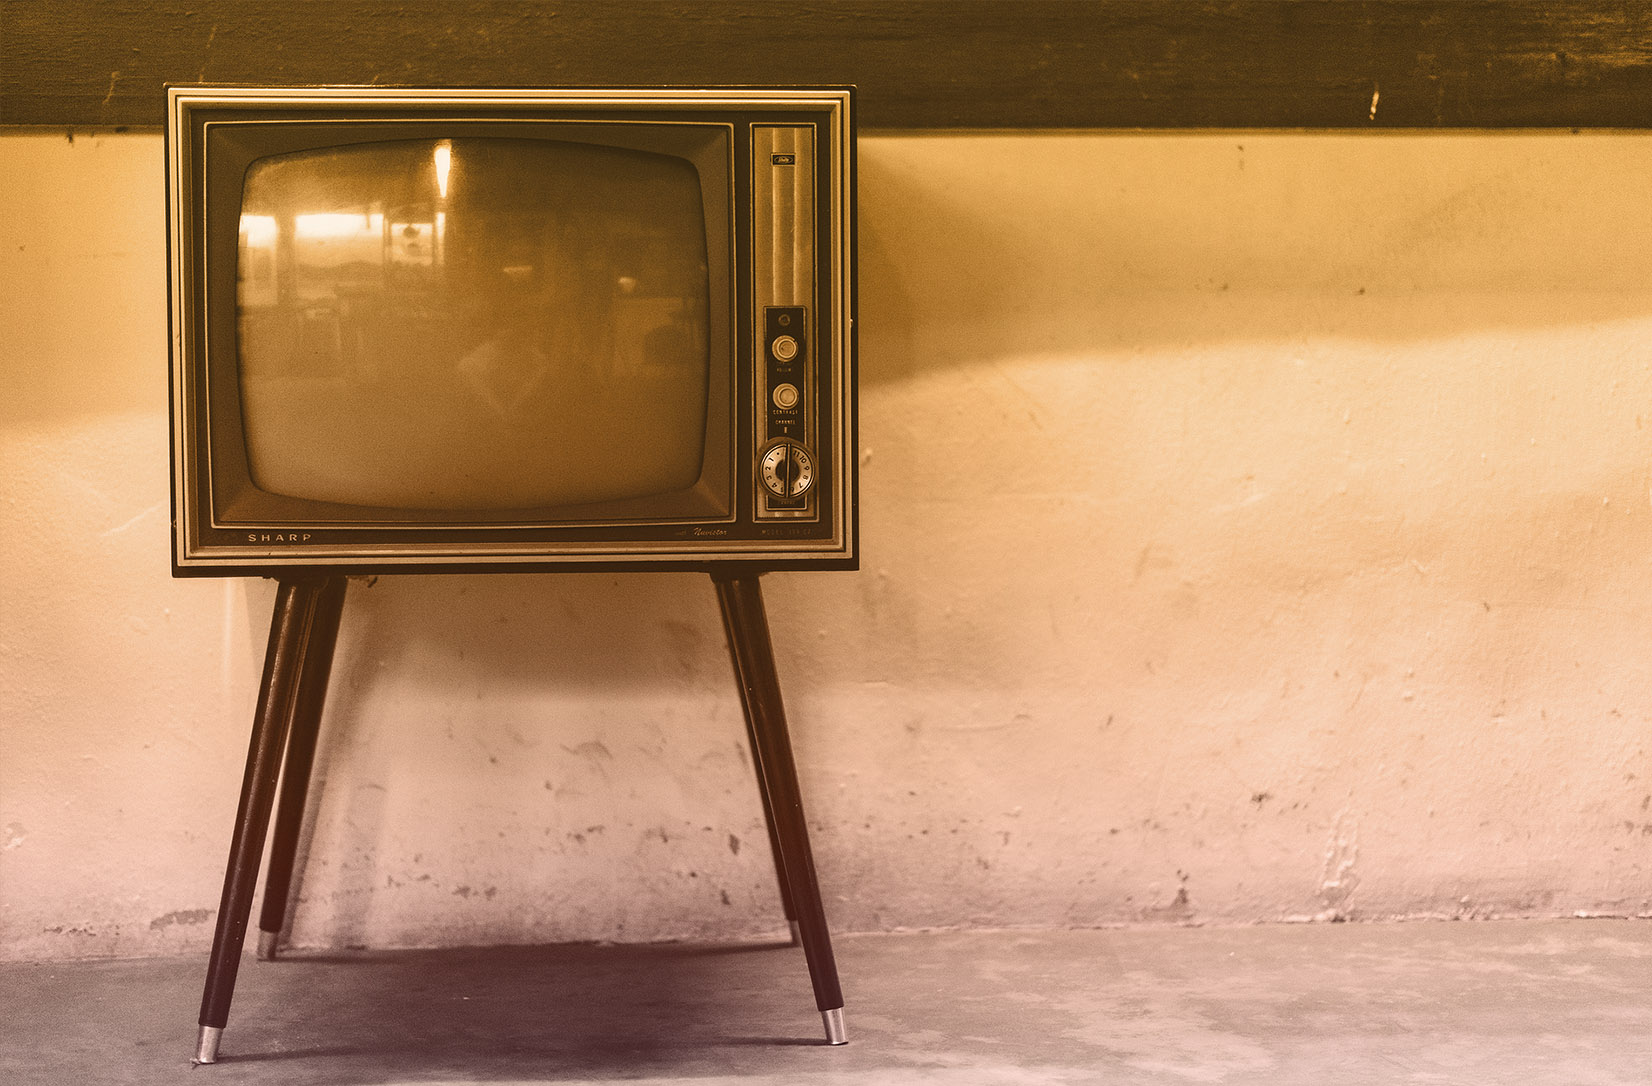 Traditional TV Has Become a Downtrend Streaming is the new trend'
